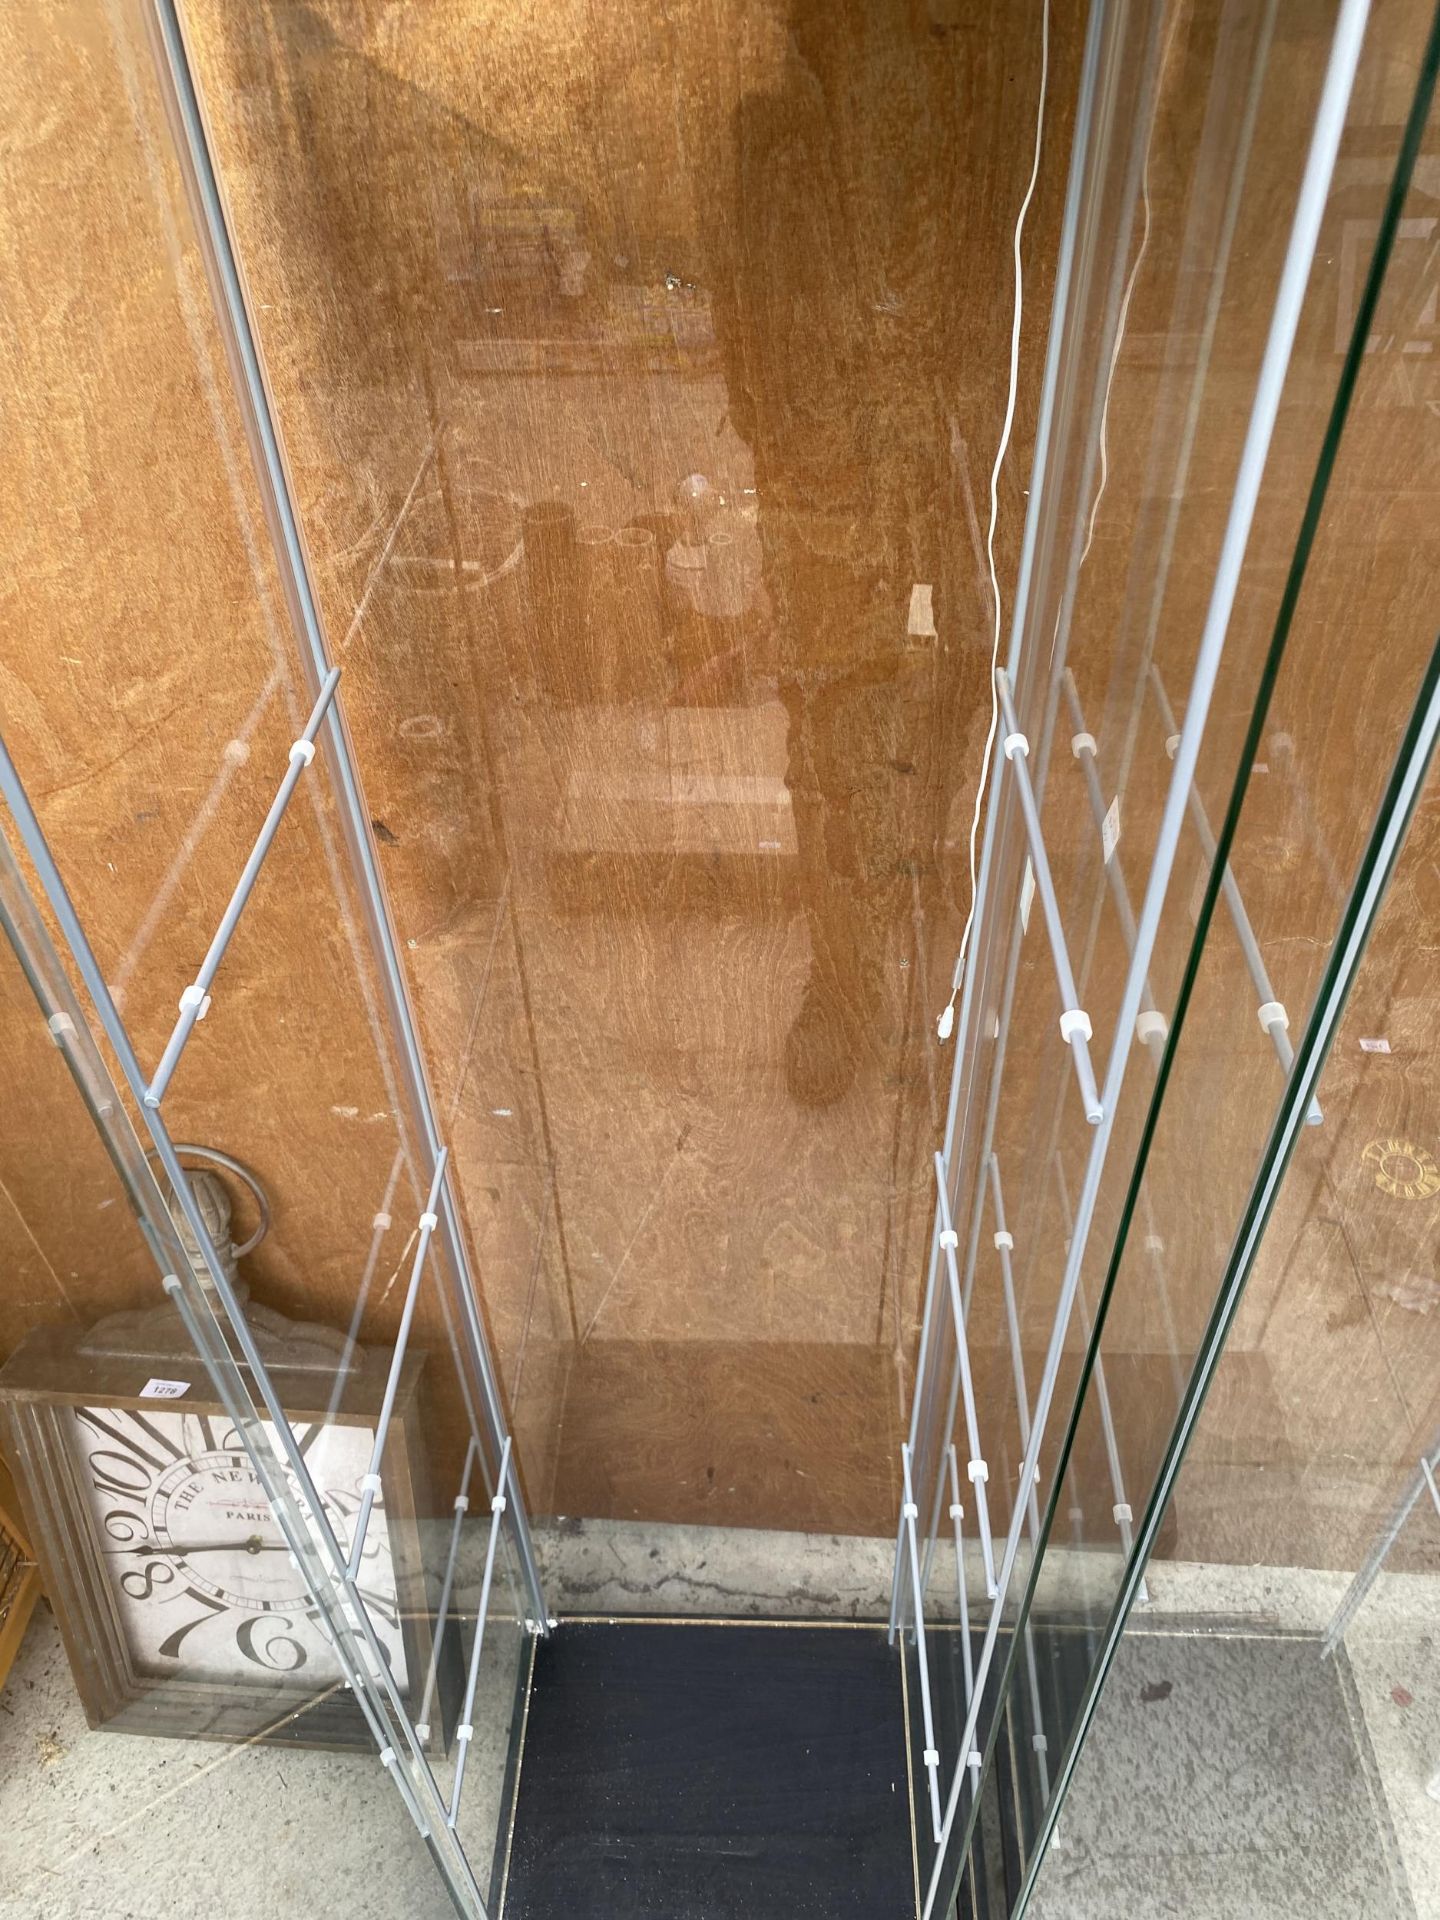 A PAIR OF GLASS DISPLAY CABINETS COMPLETE WITH THREE GLASS SHELVES EACH - Image 4 of 5